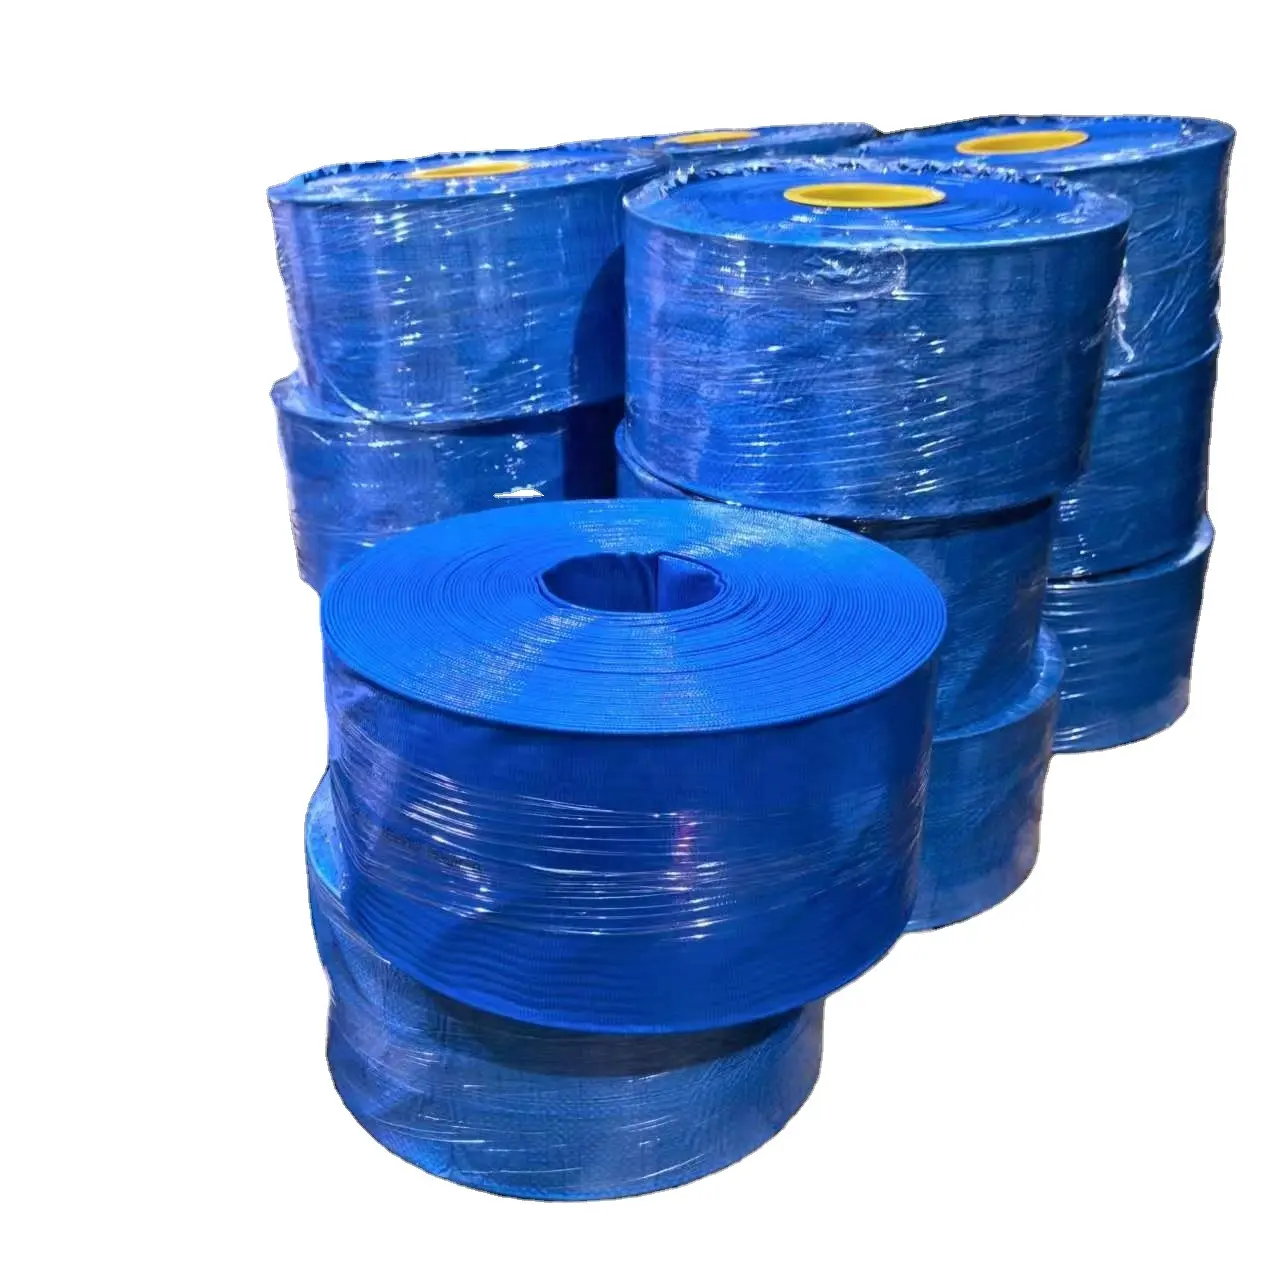 YUE HUA 50m 100m non-toxic odorless Tubing Pipe Flexible Lay Flat Irrigation Agricultural Water Hose PVC layflat hose